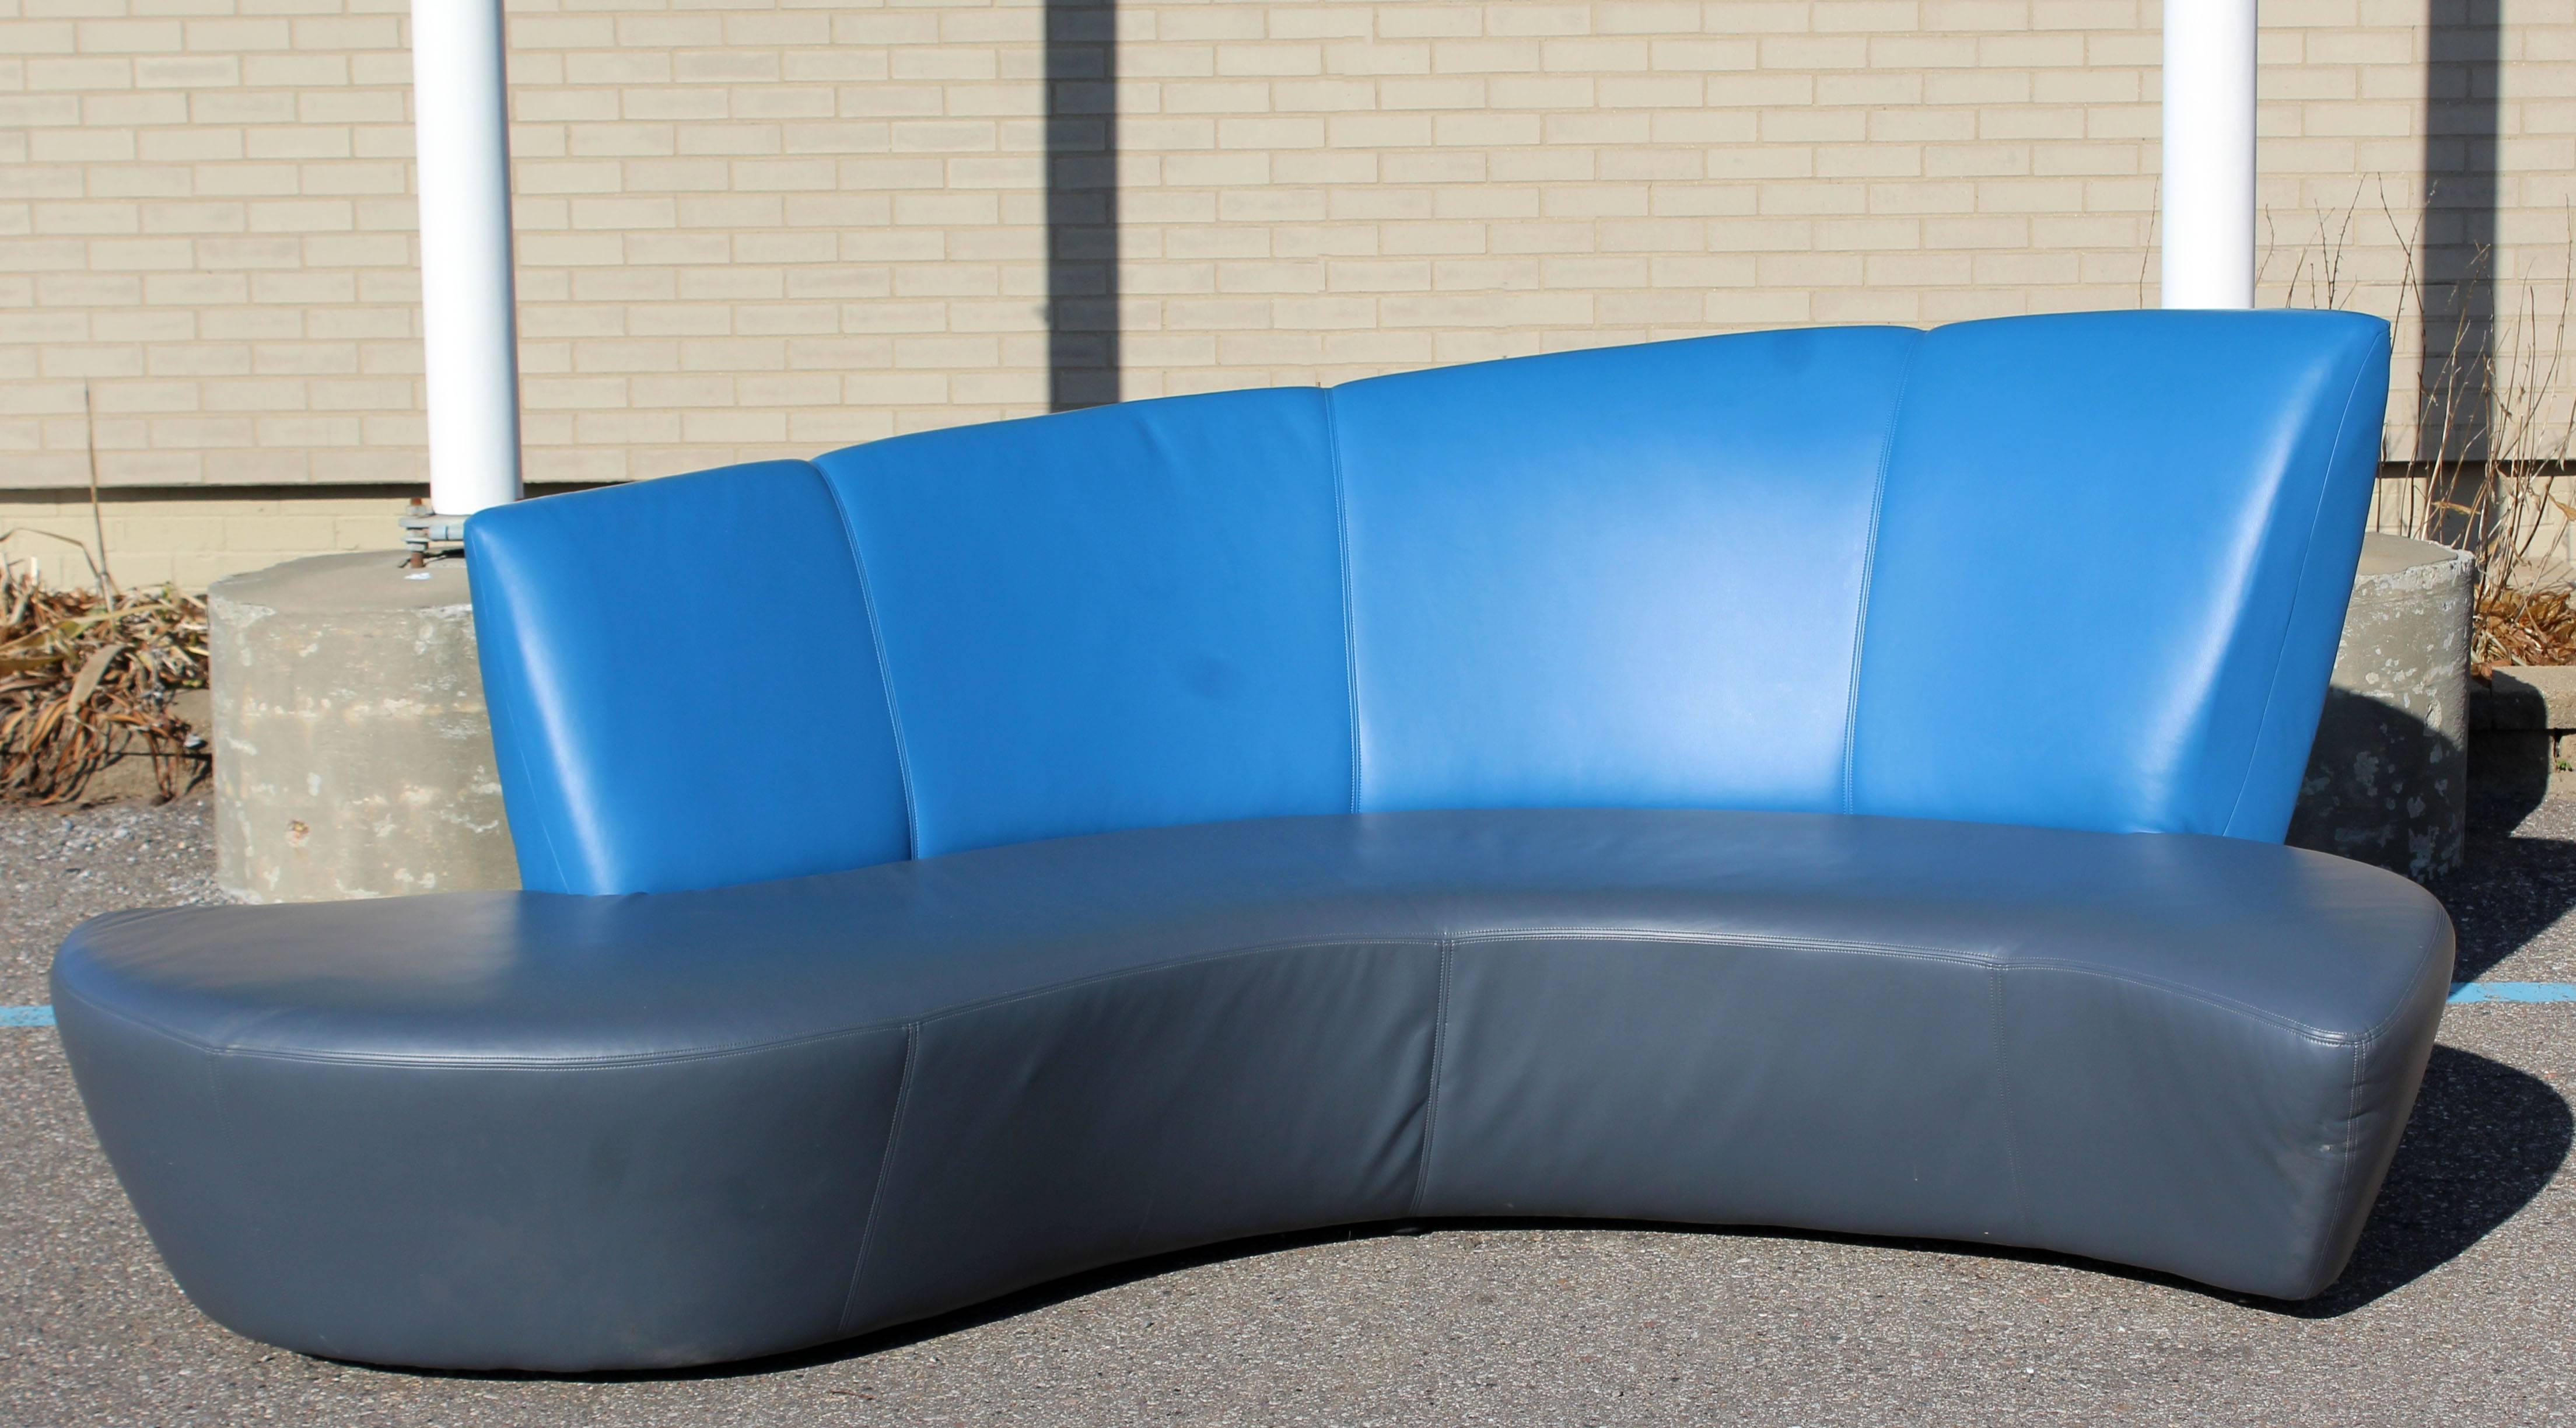 For your consideration is a phenomenal, curved, Balboa sofa, with blue and gray leather upholstery, by Vladimir Kagan for Weiman, circa the 1970s. In excellent condition. The dimensions are 96